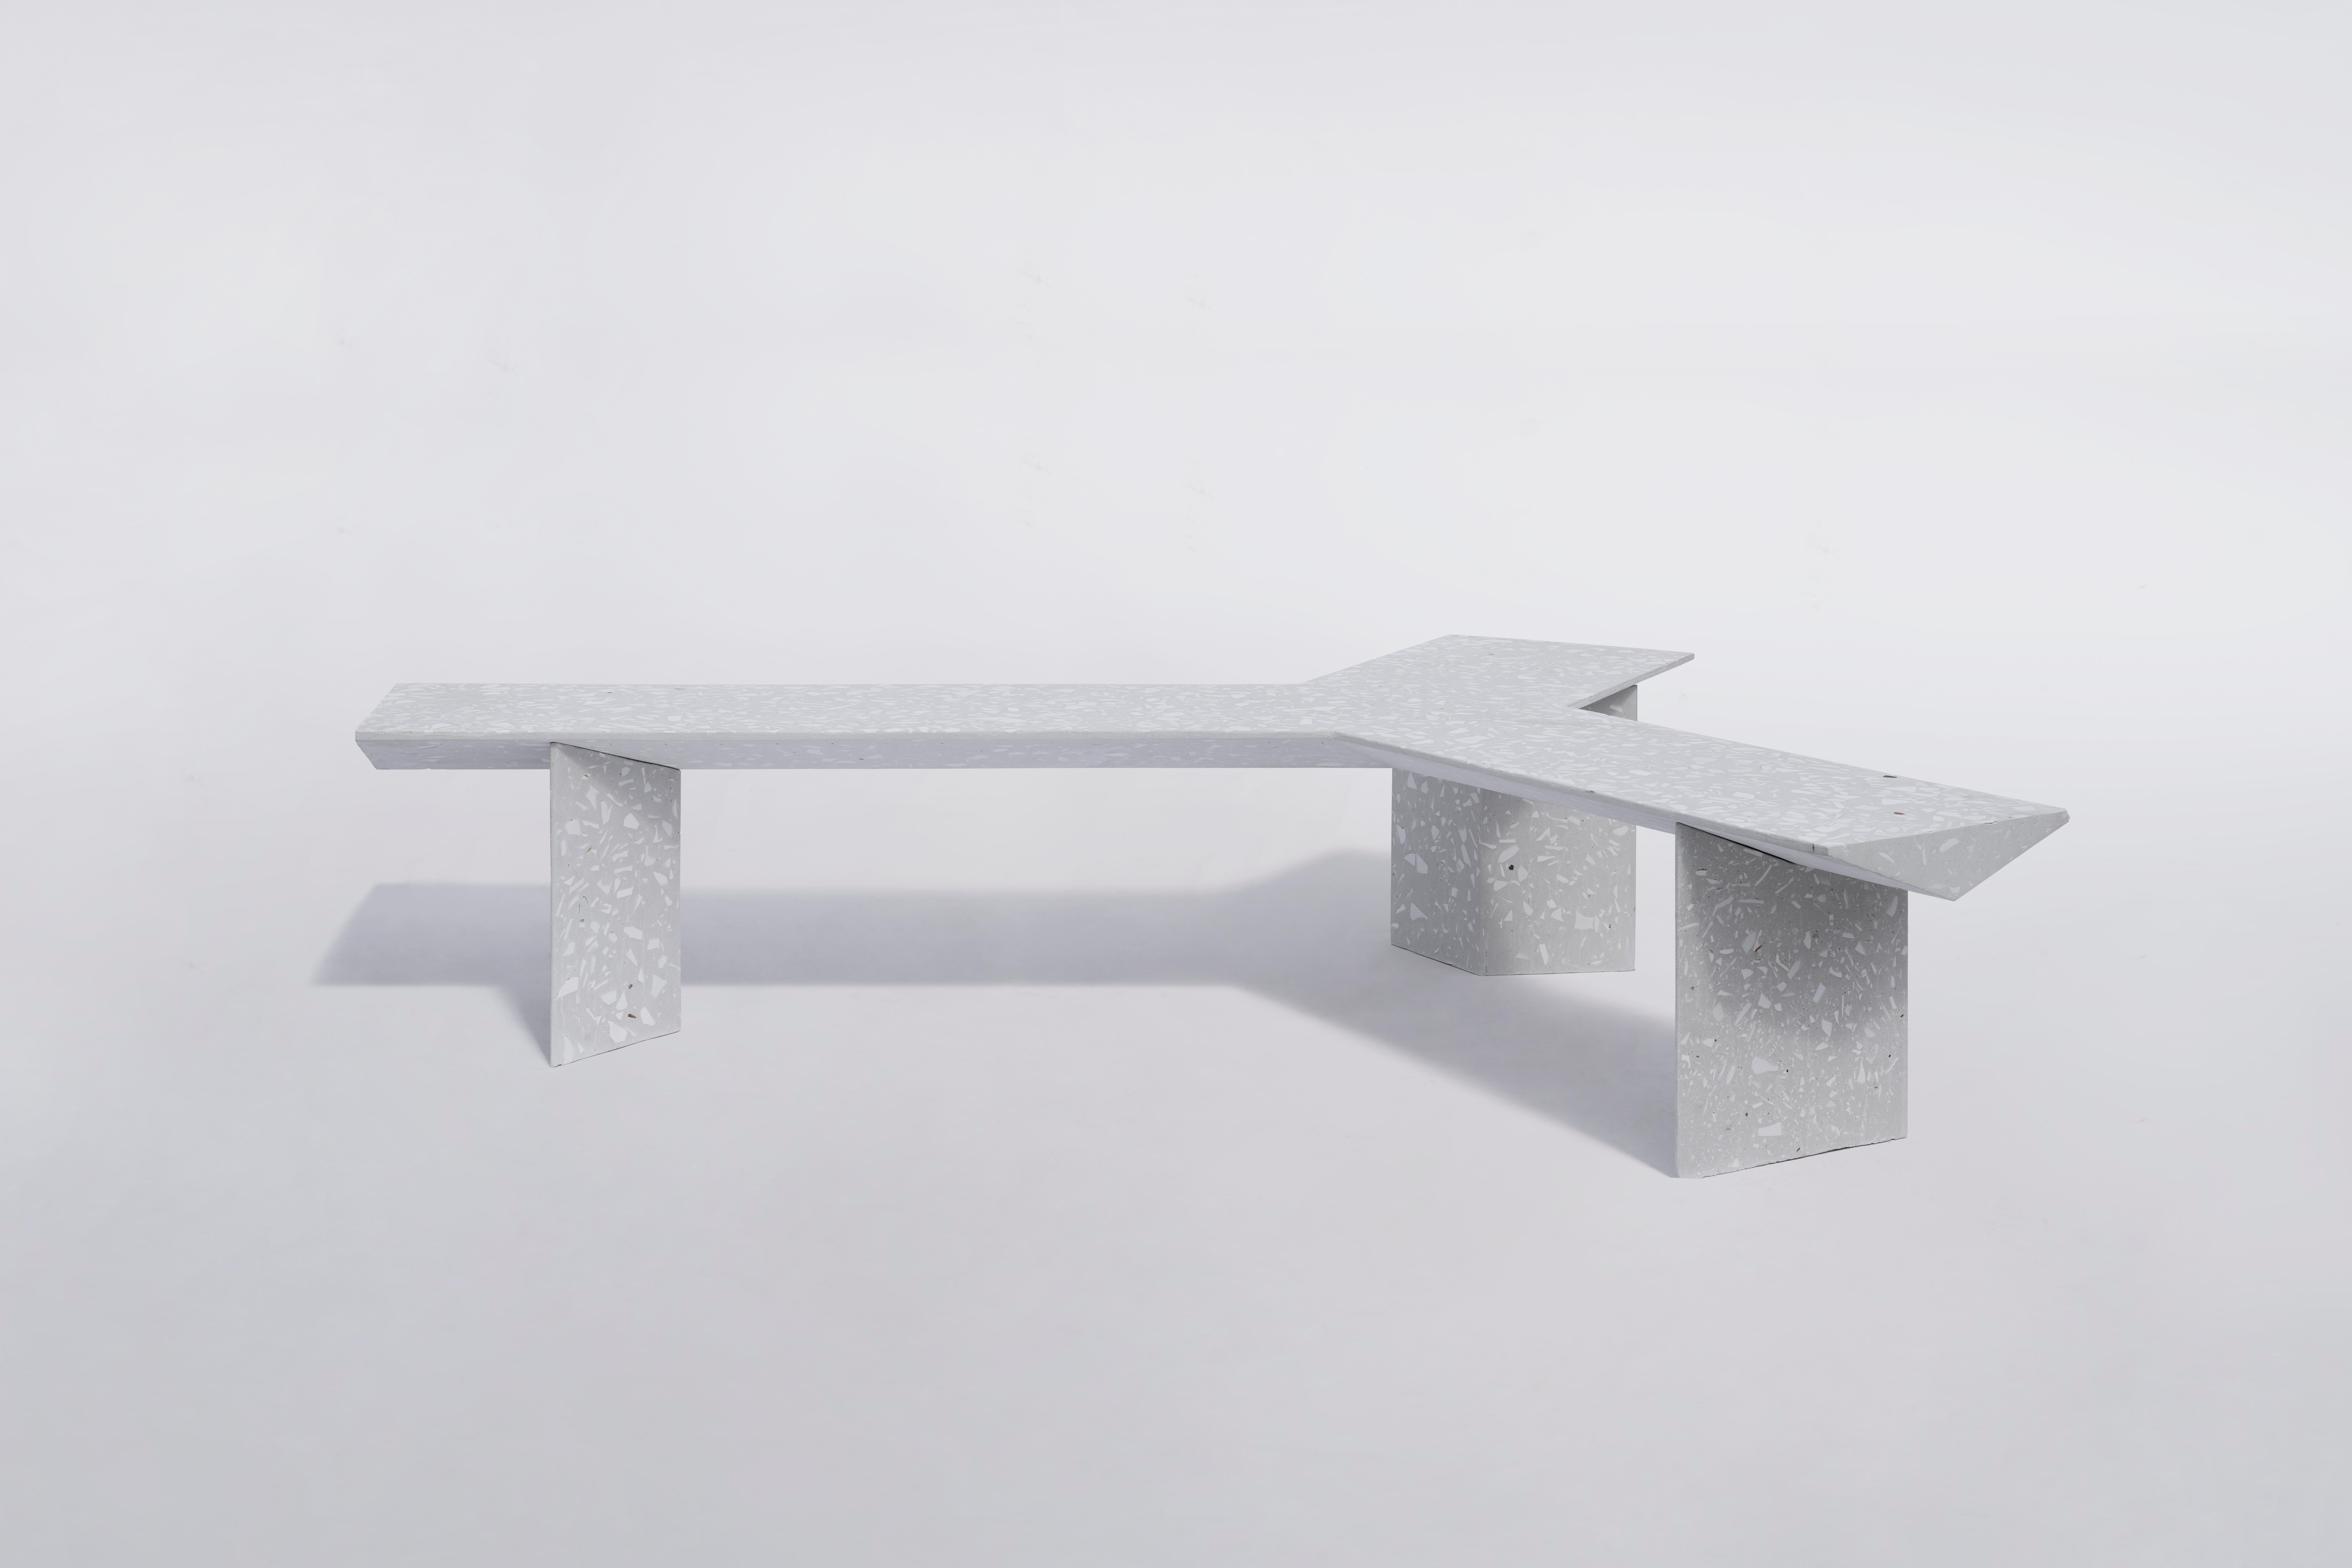 LIANG 2 Bench by Bentu Design

Concrete and ceramic waste / Terrazzo
2045×1700×445 mm 
206 kg
Outdoor use: OK

Module bench: assemble LIANG 1 and LIANG 2 to create a sculptural bench.

--
Bentu Desing is a Guangzhou-based experimental